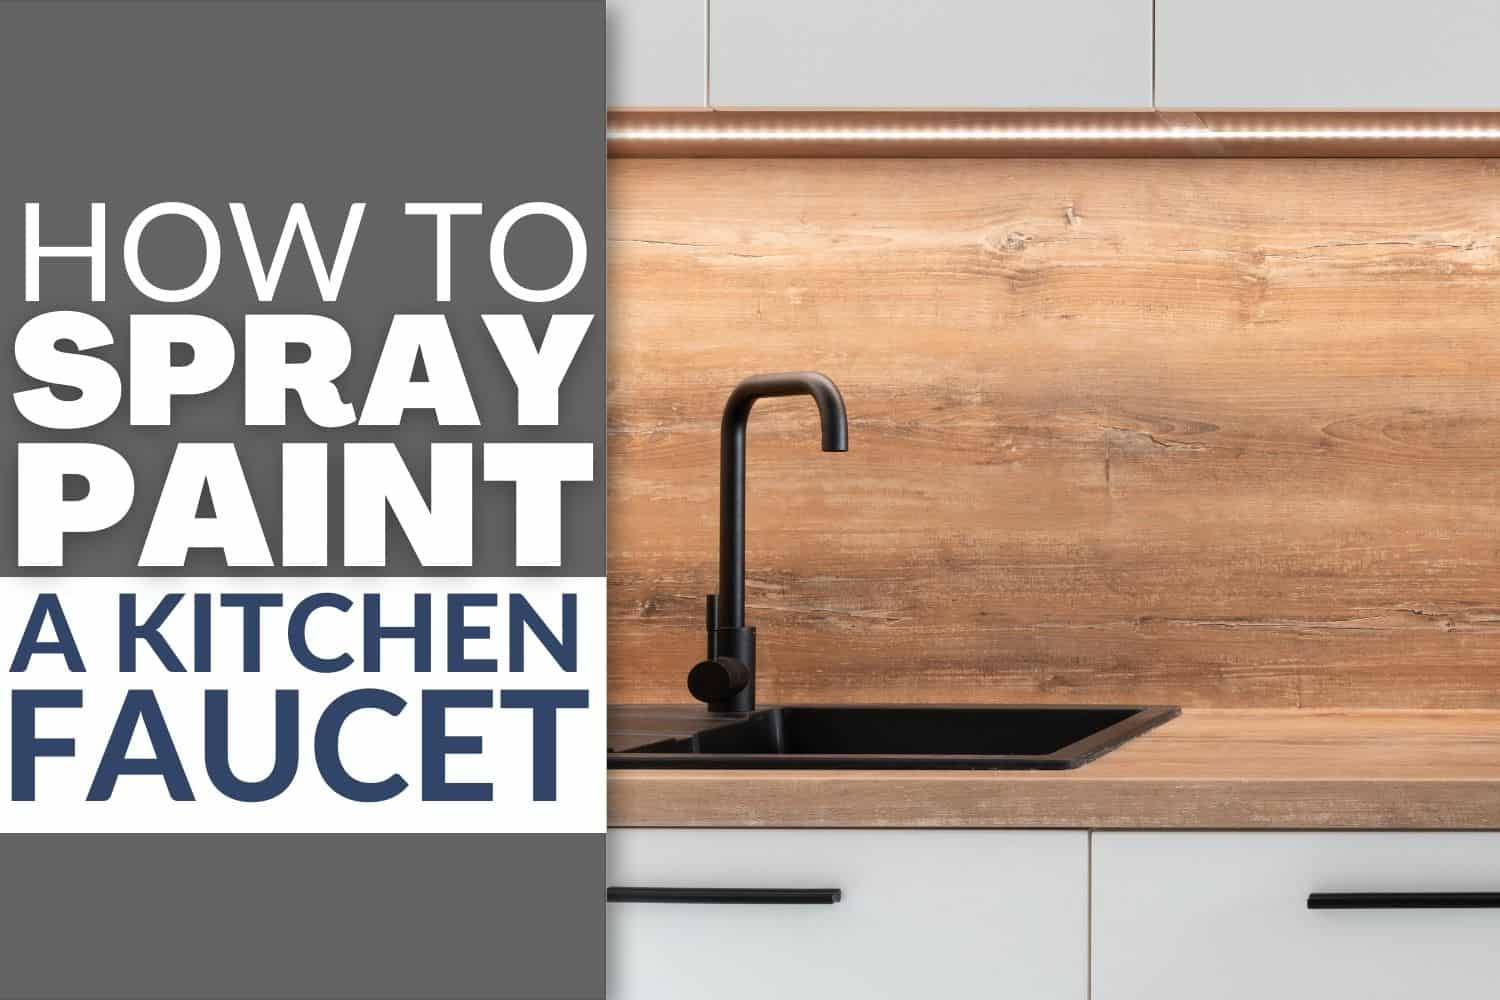 How to spray paint a kitchen faucet